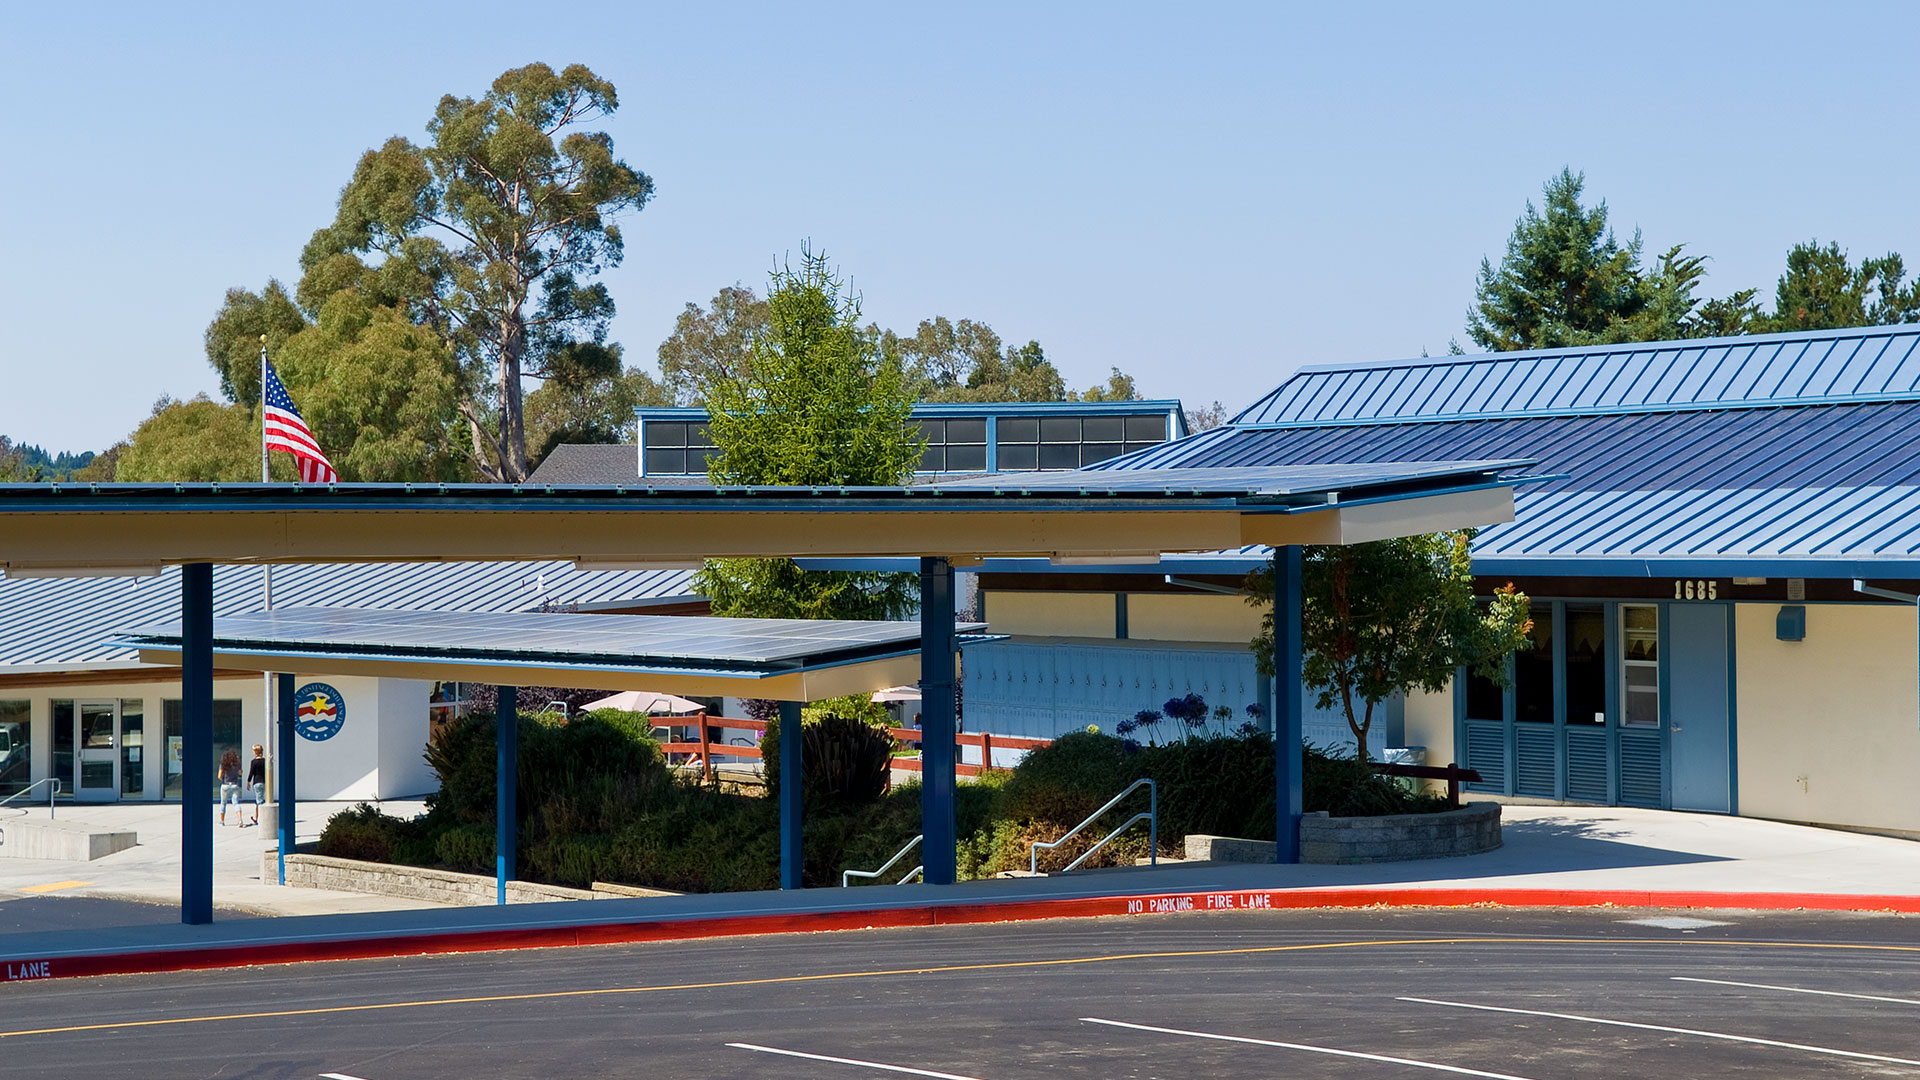 Covered walkways in parking area with solar panels extending along the roof. School campus behind.